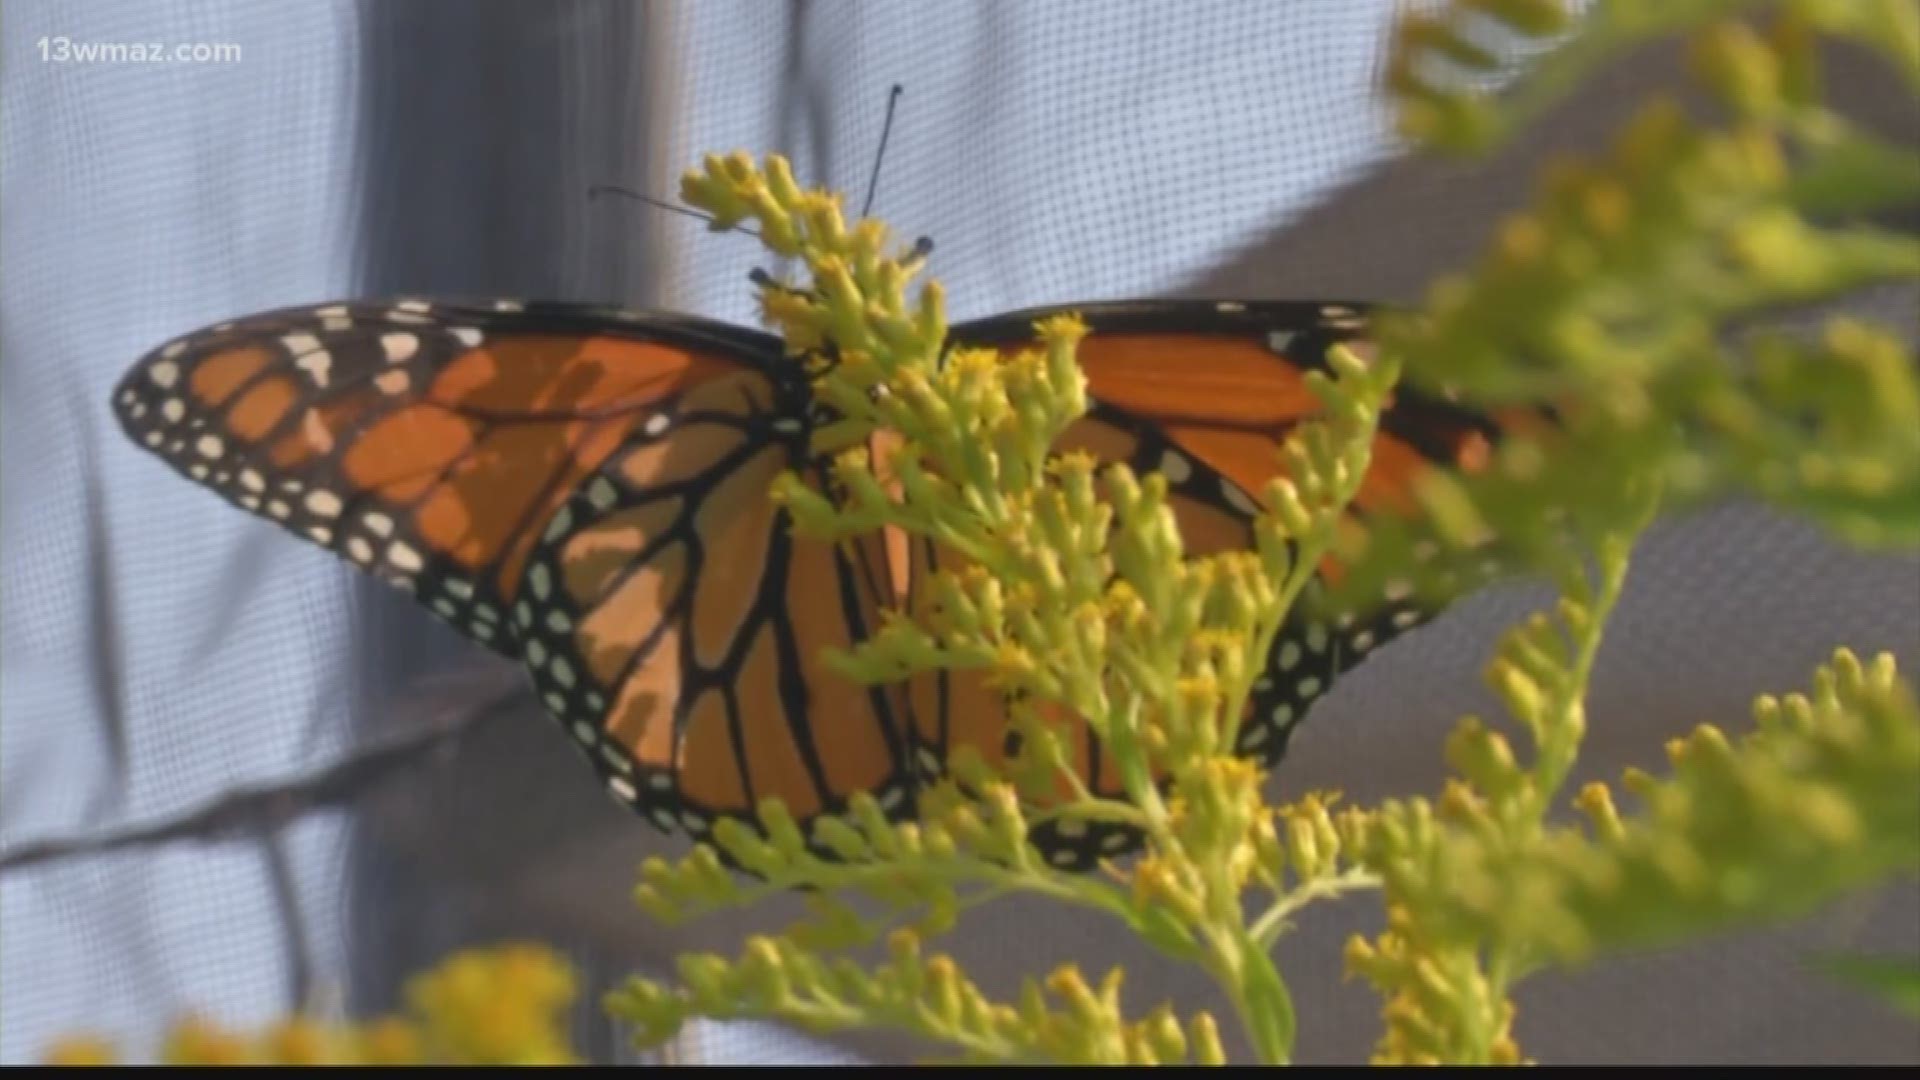 The Wildlife Society says the monarch butterfly population is going downhill. Sabrina Burse shows us how folks at Lake Jonesco Golf Course want to help the monarchs make a comeback.